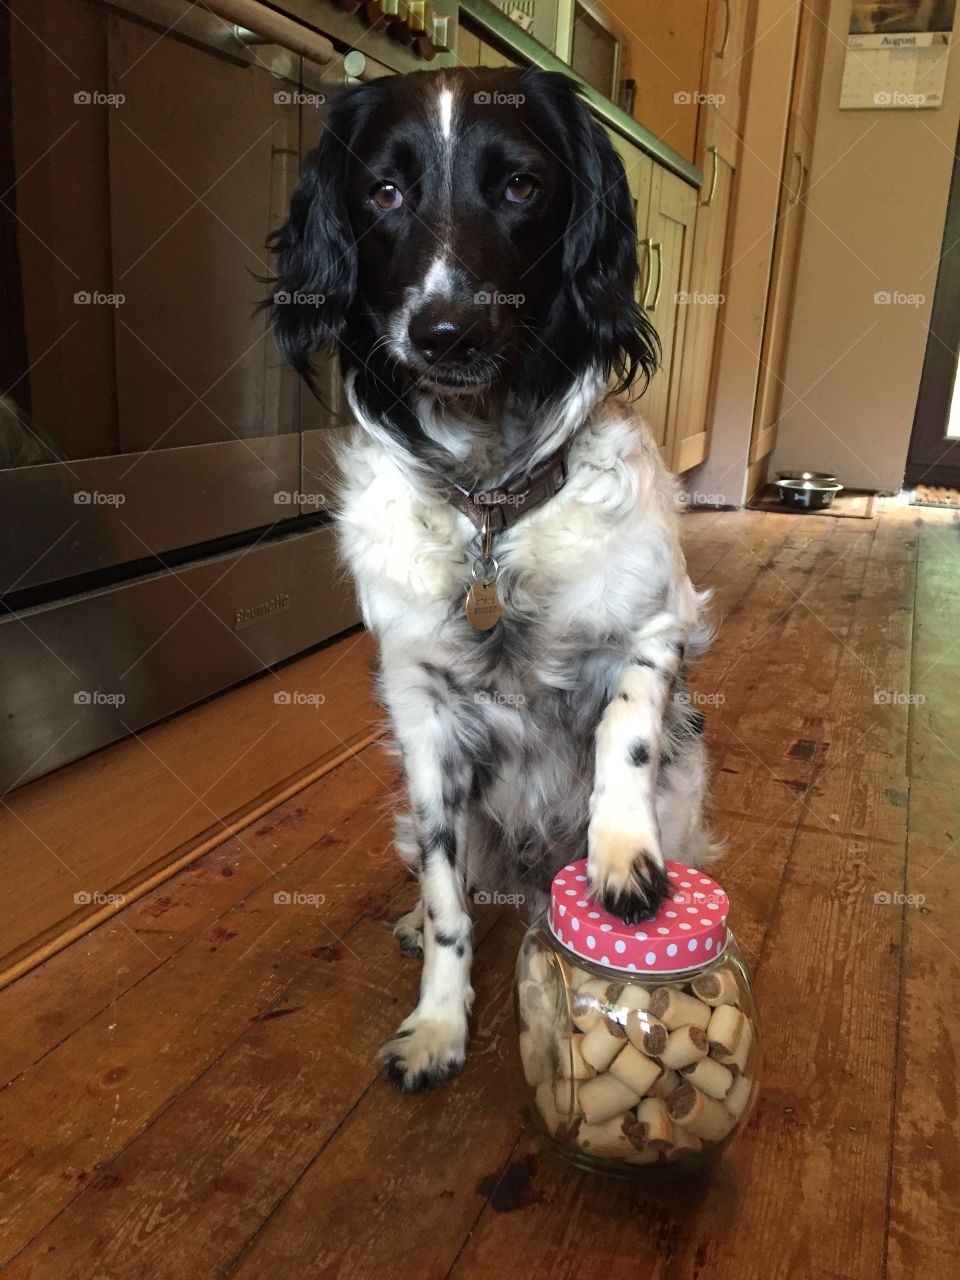 Can’t keep his paws out the cookie jar. Greedy spaniel.